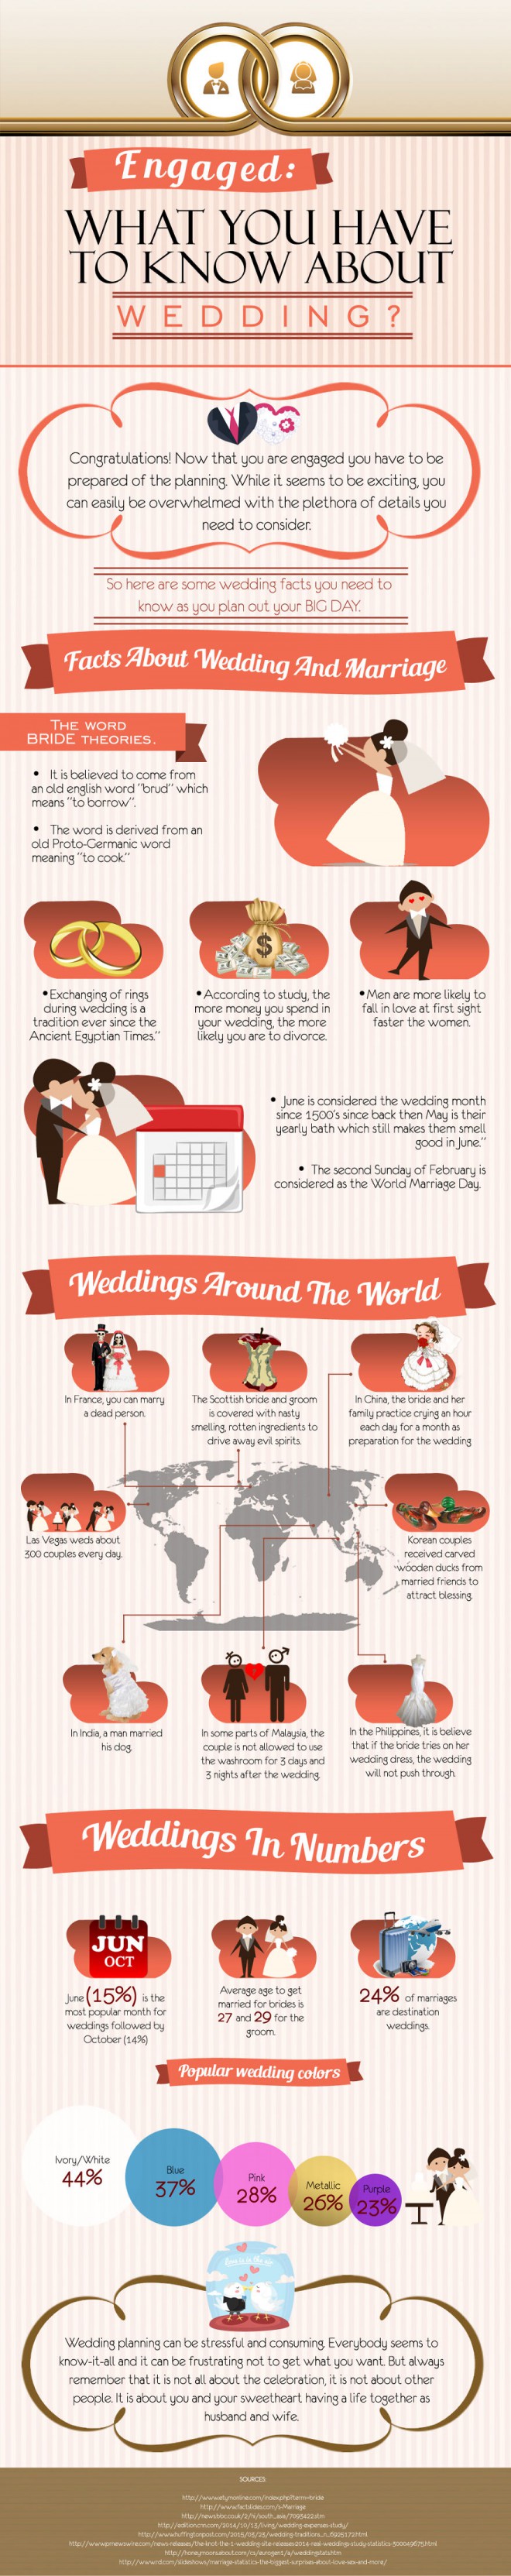 Little known facts about marriage and wedding customs.